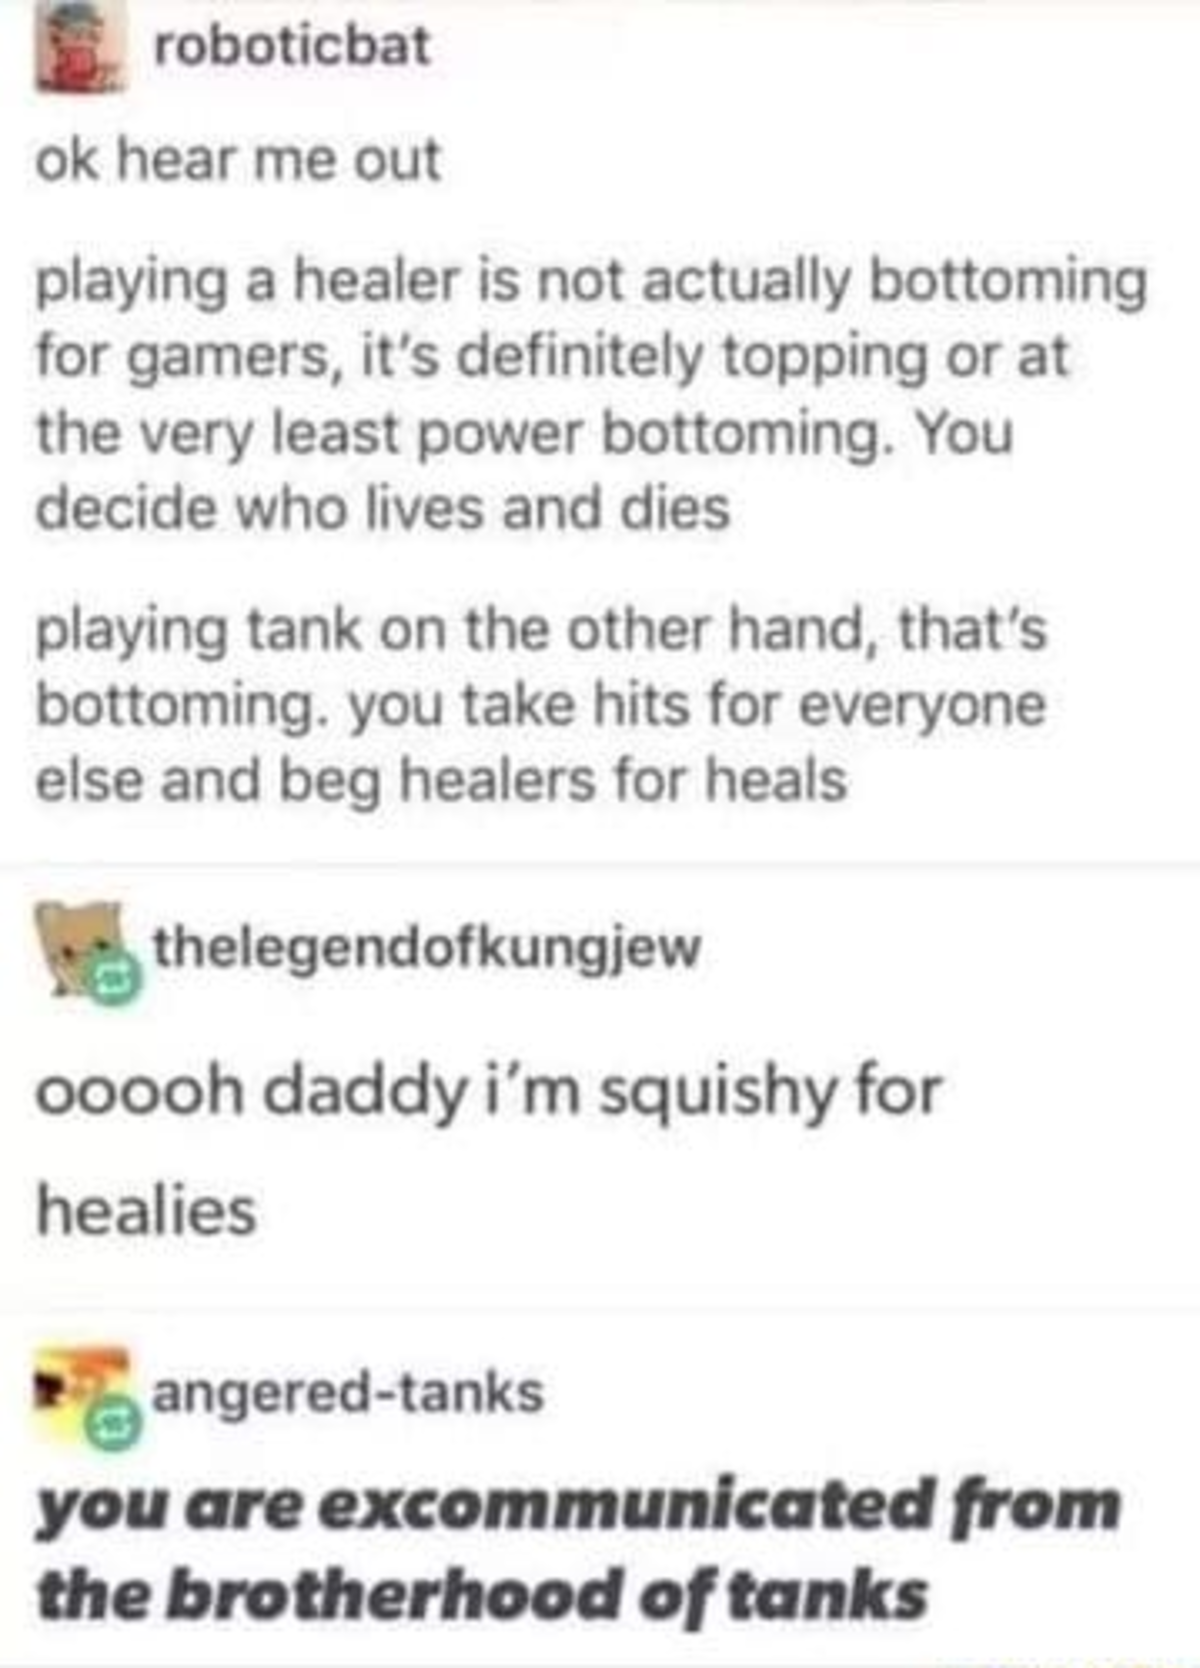 heal me up daddy. .. Imagine actually wanting your healers to heal you. This post was made by death knight gang.